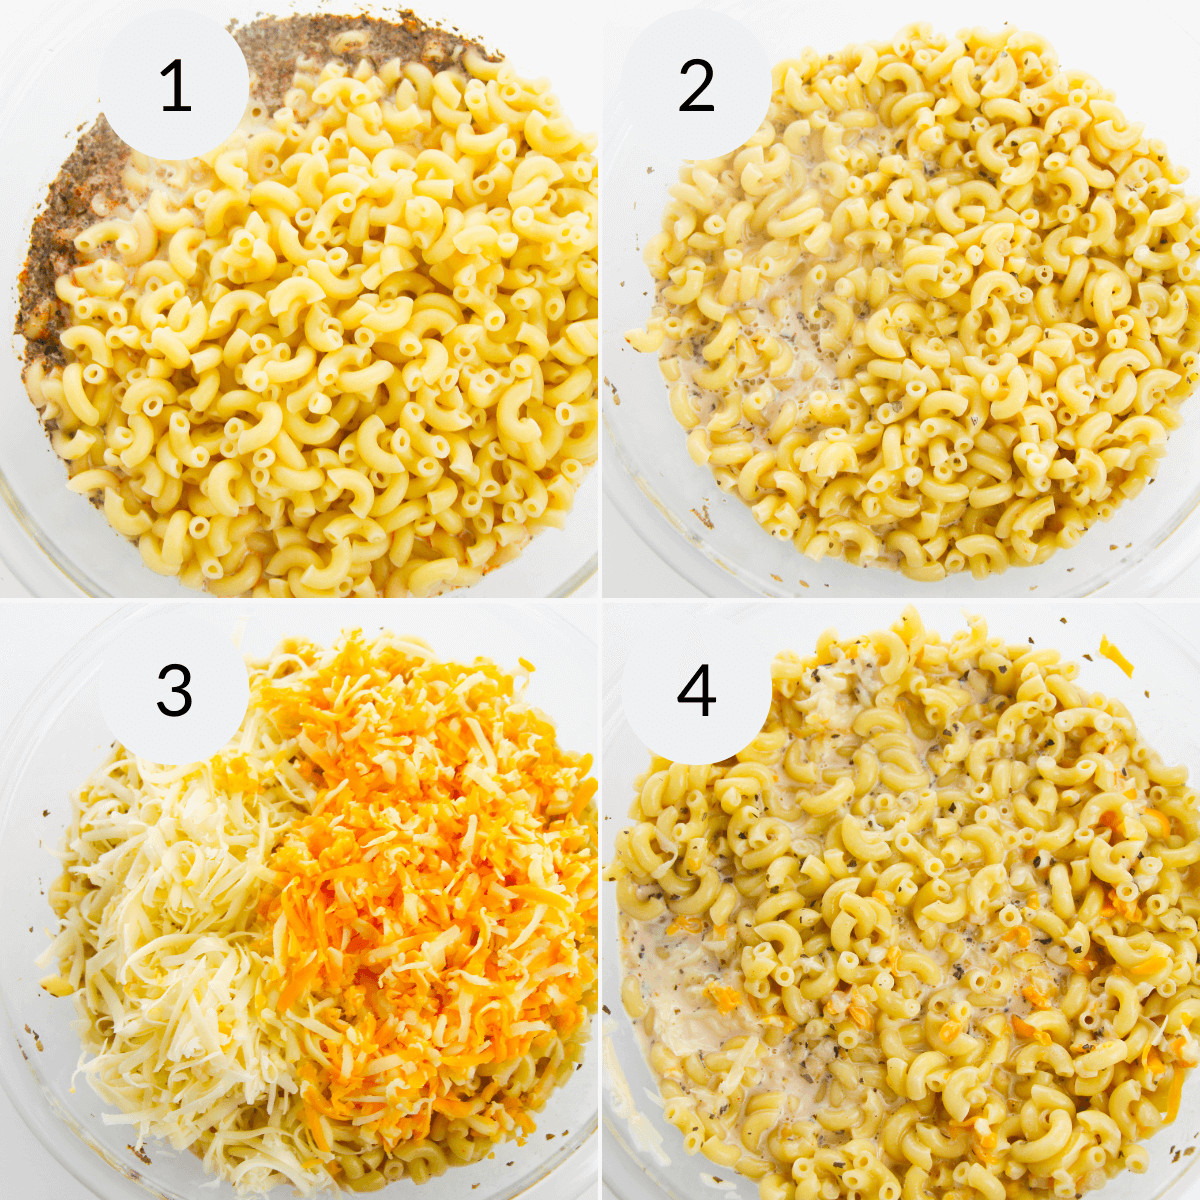 Step by step instructions for combining cheese and pasta.